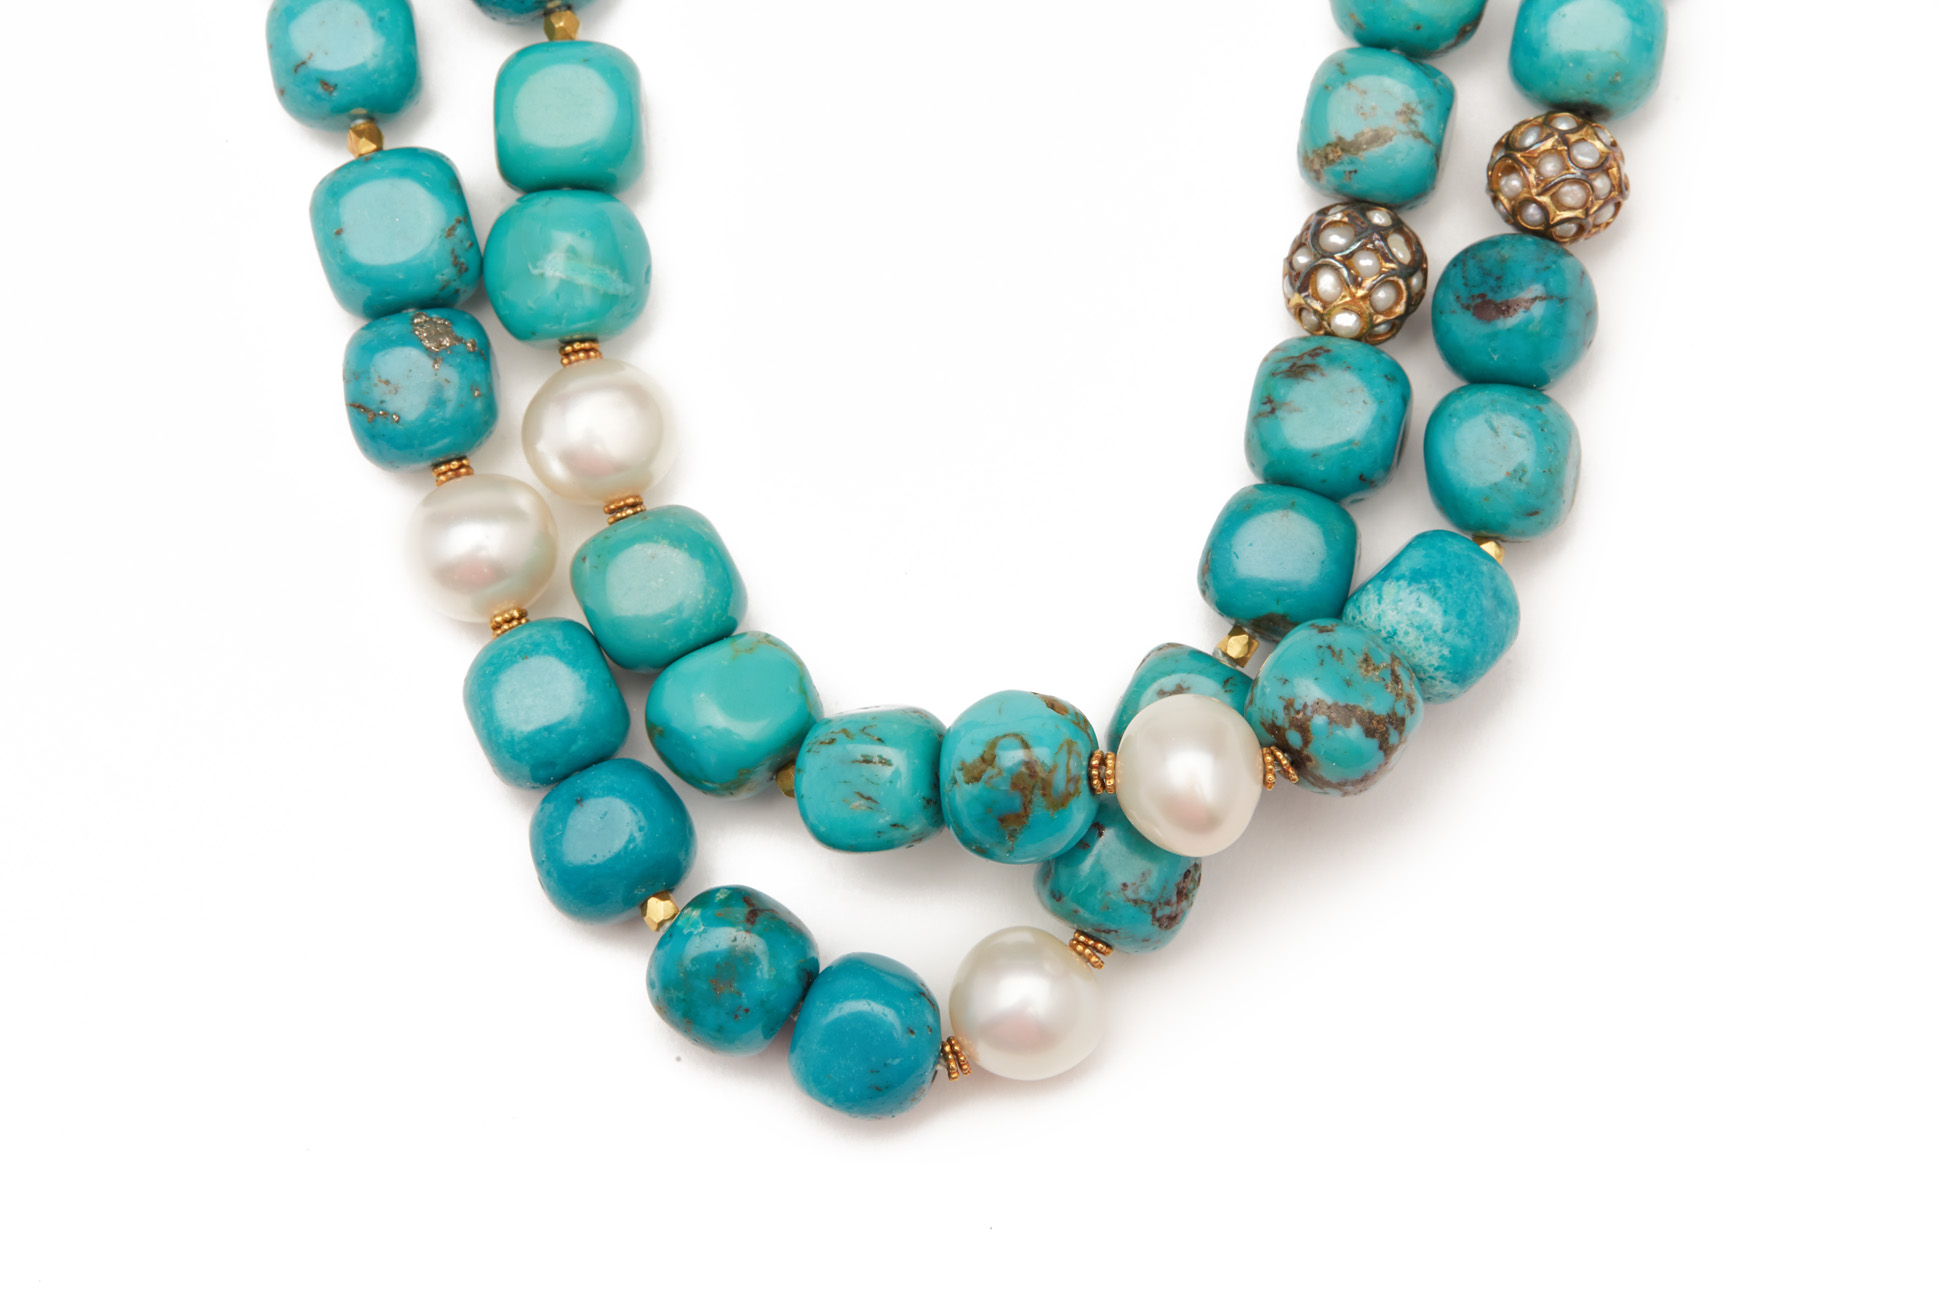 A TURQUOISE BEAD AND PEARL NECKLACE